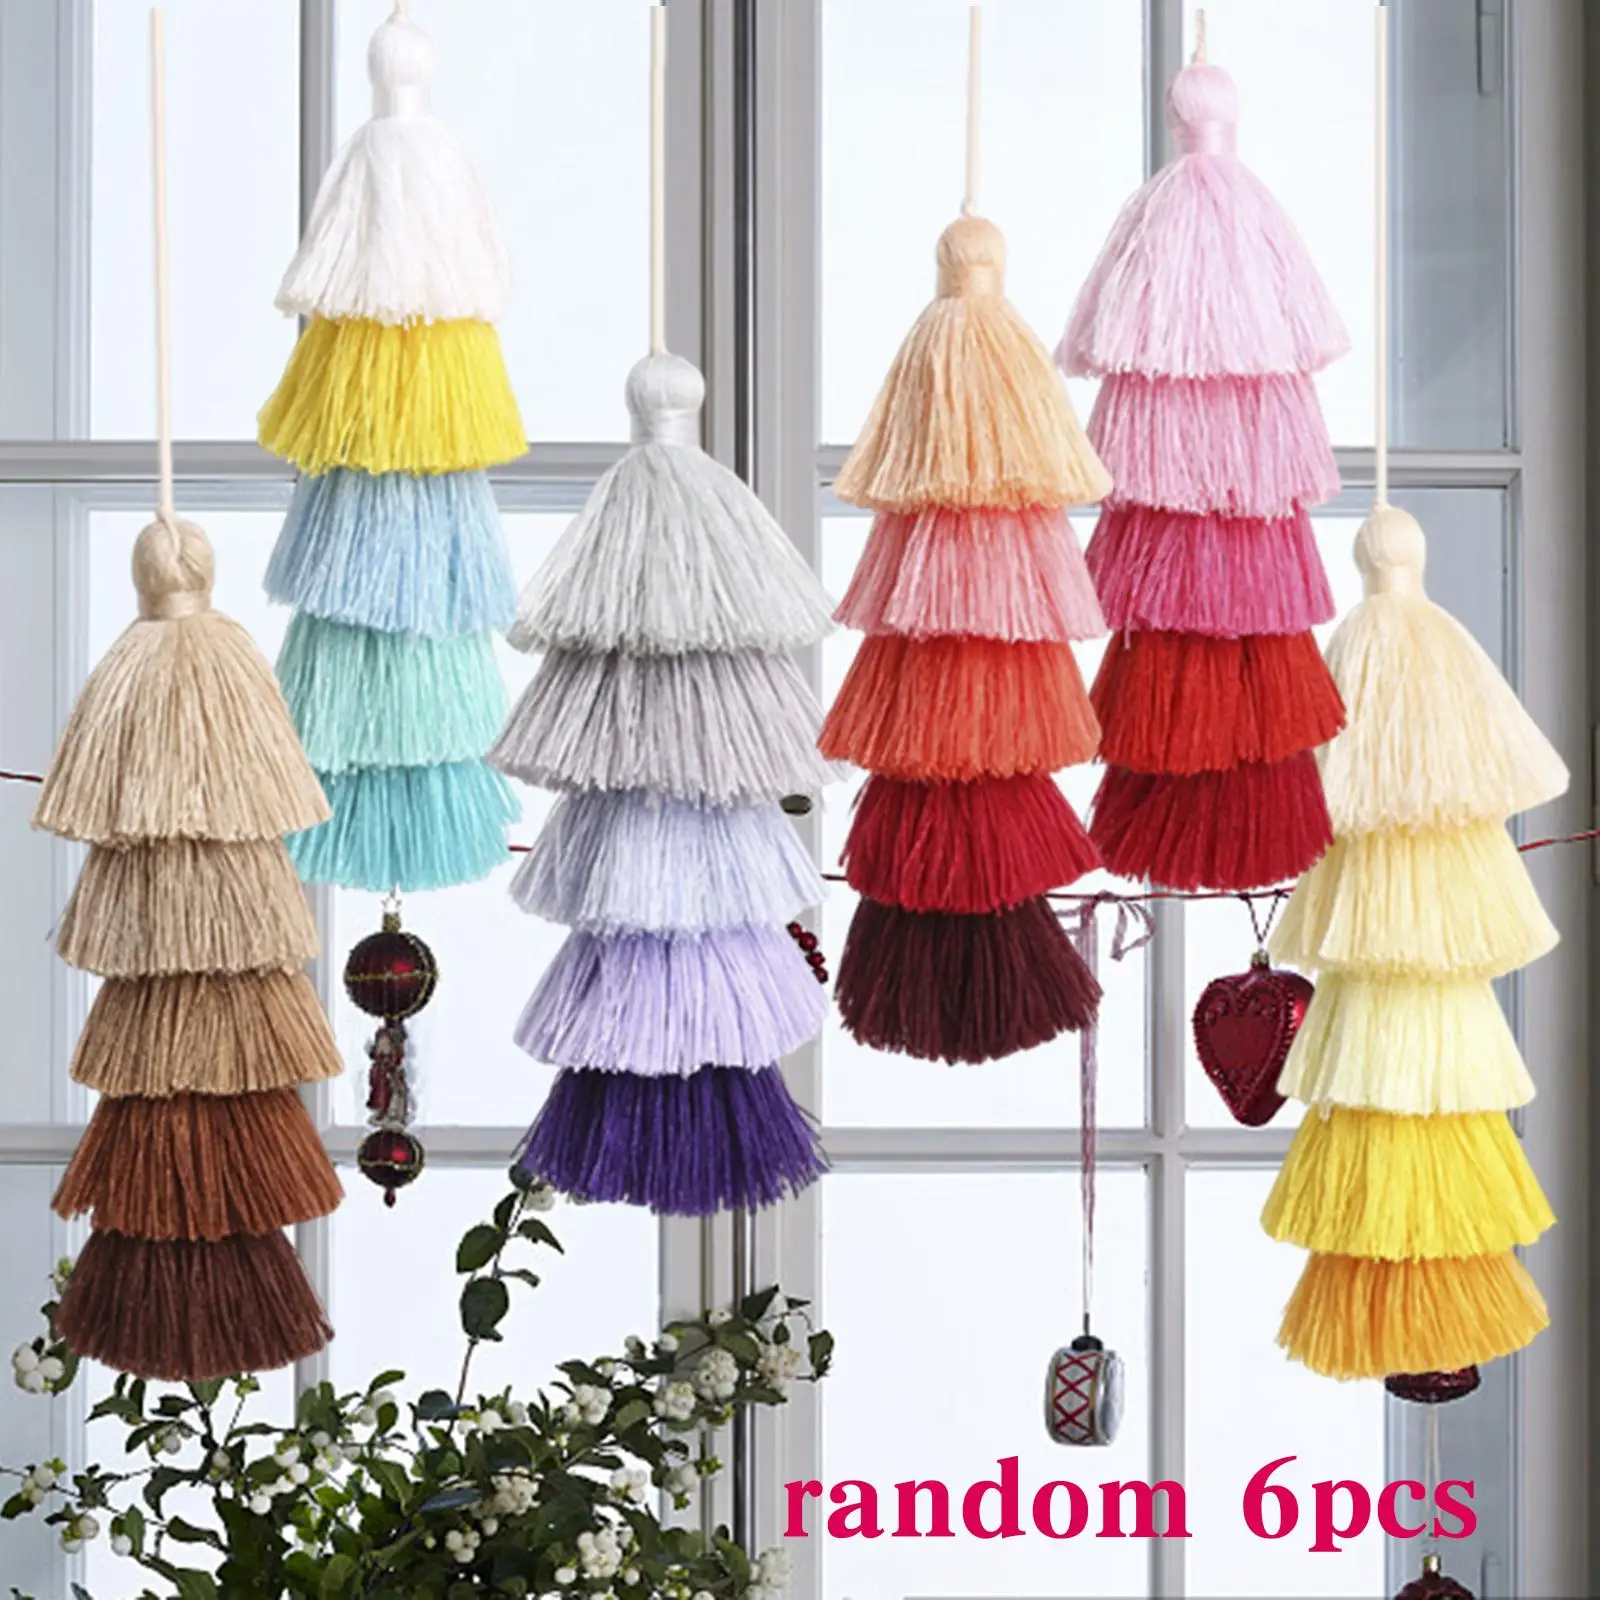 6 Pieces Colorful Bohemian Pompom Tassel Key Chain Key Ring Pendant Bookmarks Girls Decor Fringe for Jewelry Making Accessory